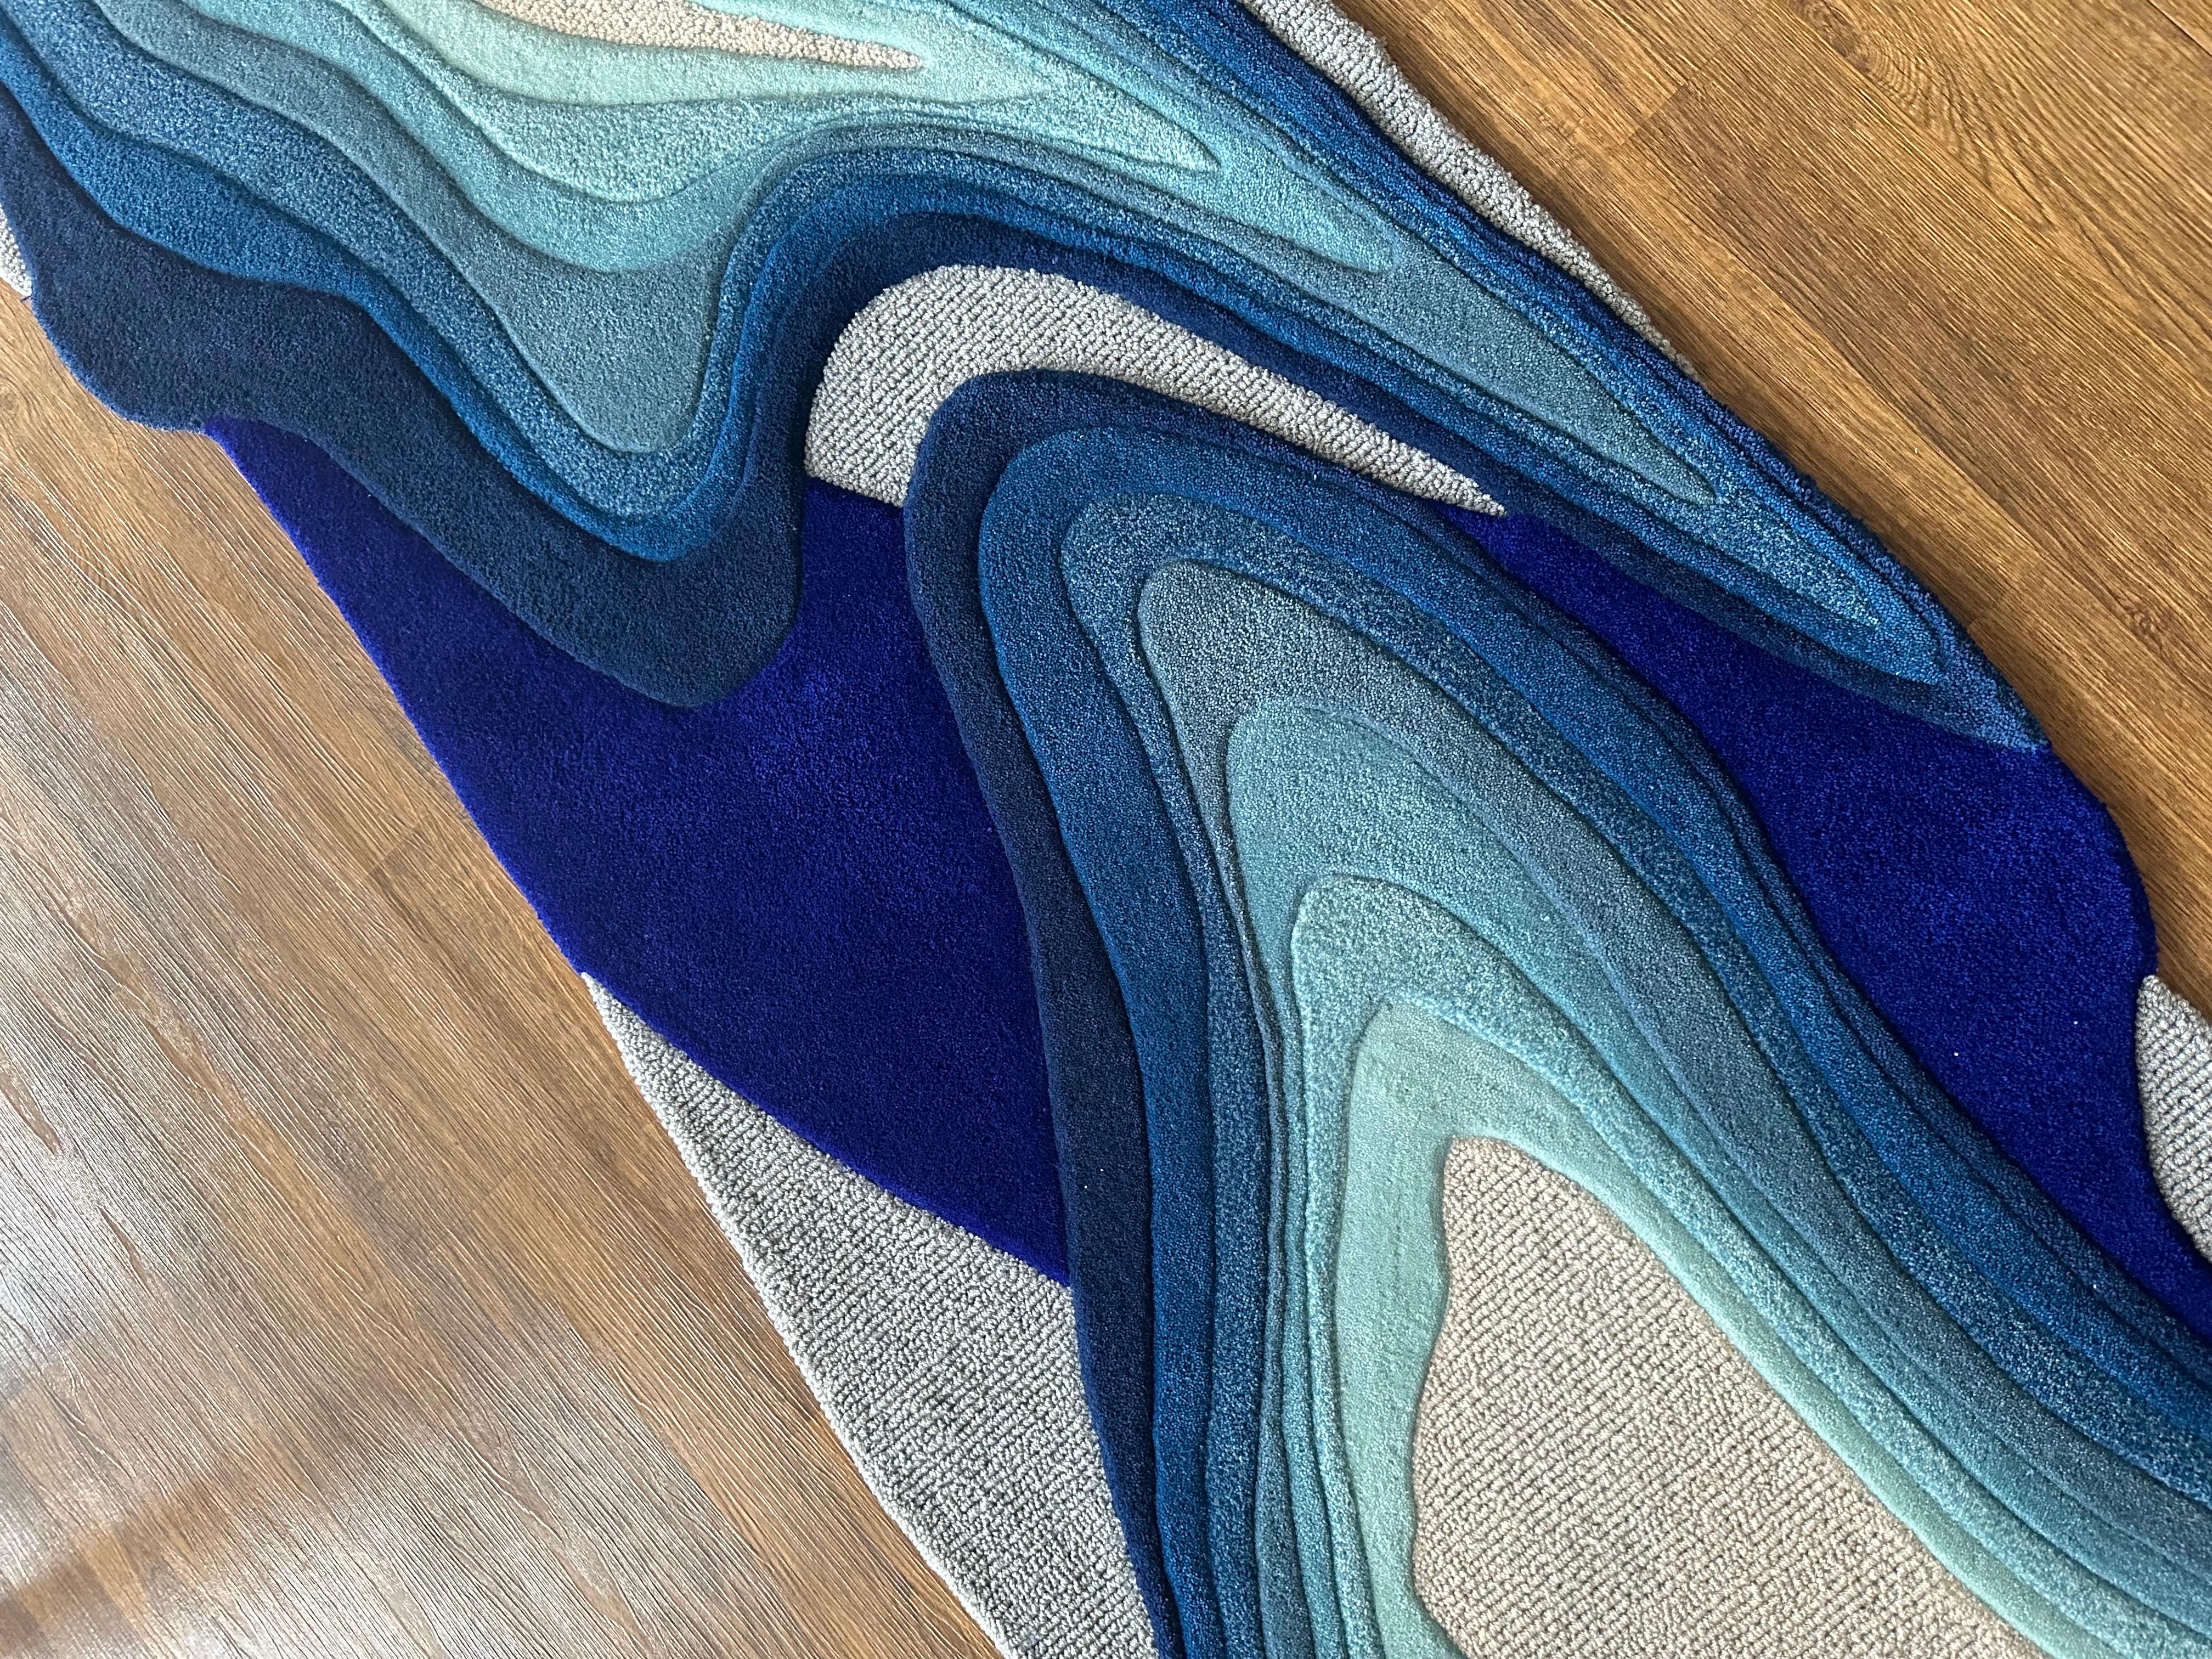 Tufted as a custom long runner with gradients transitioning from cobalt blue to grey, this contemporary rug encapsulates nature's excerpts—frozen bubbles of Abraham Lake, ocean waves, water ripples, and iceberg formations—transformed into an